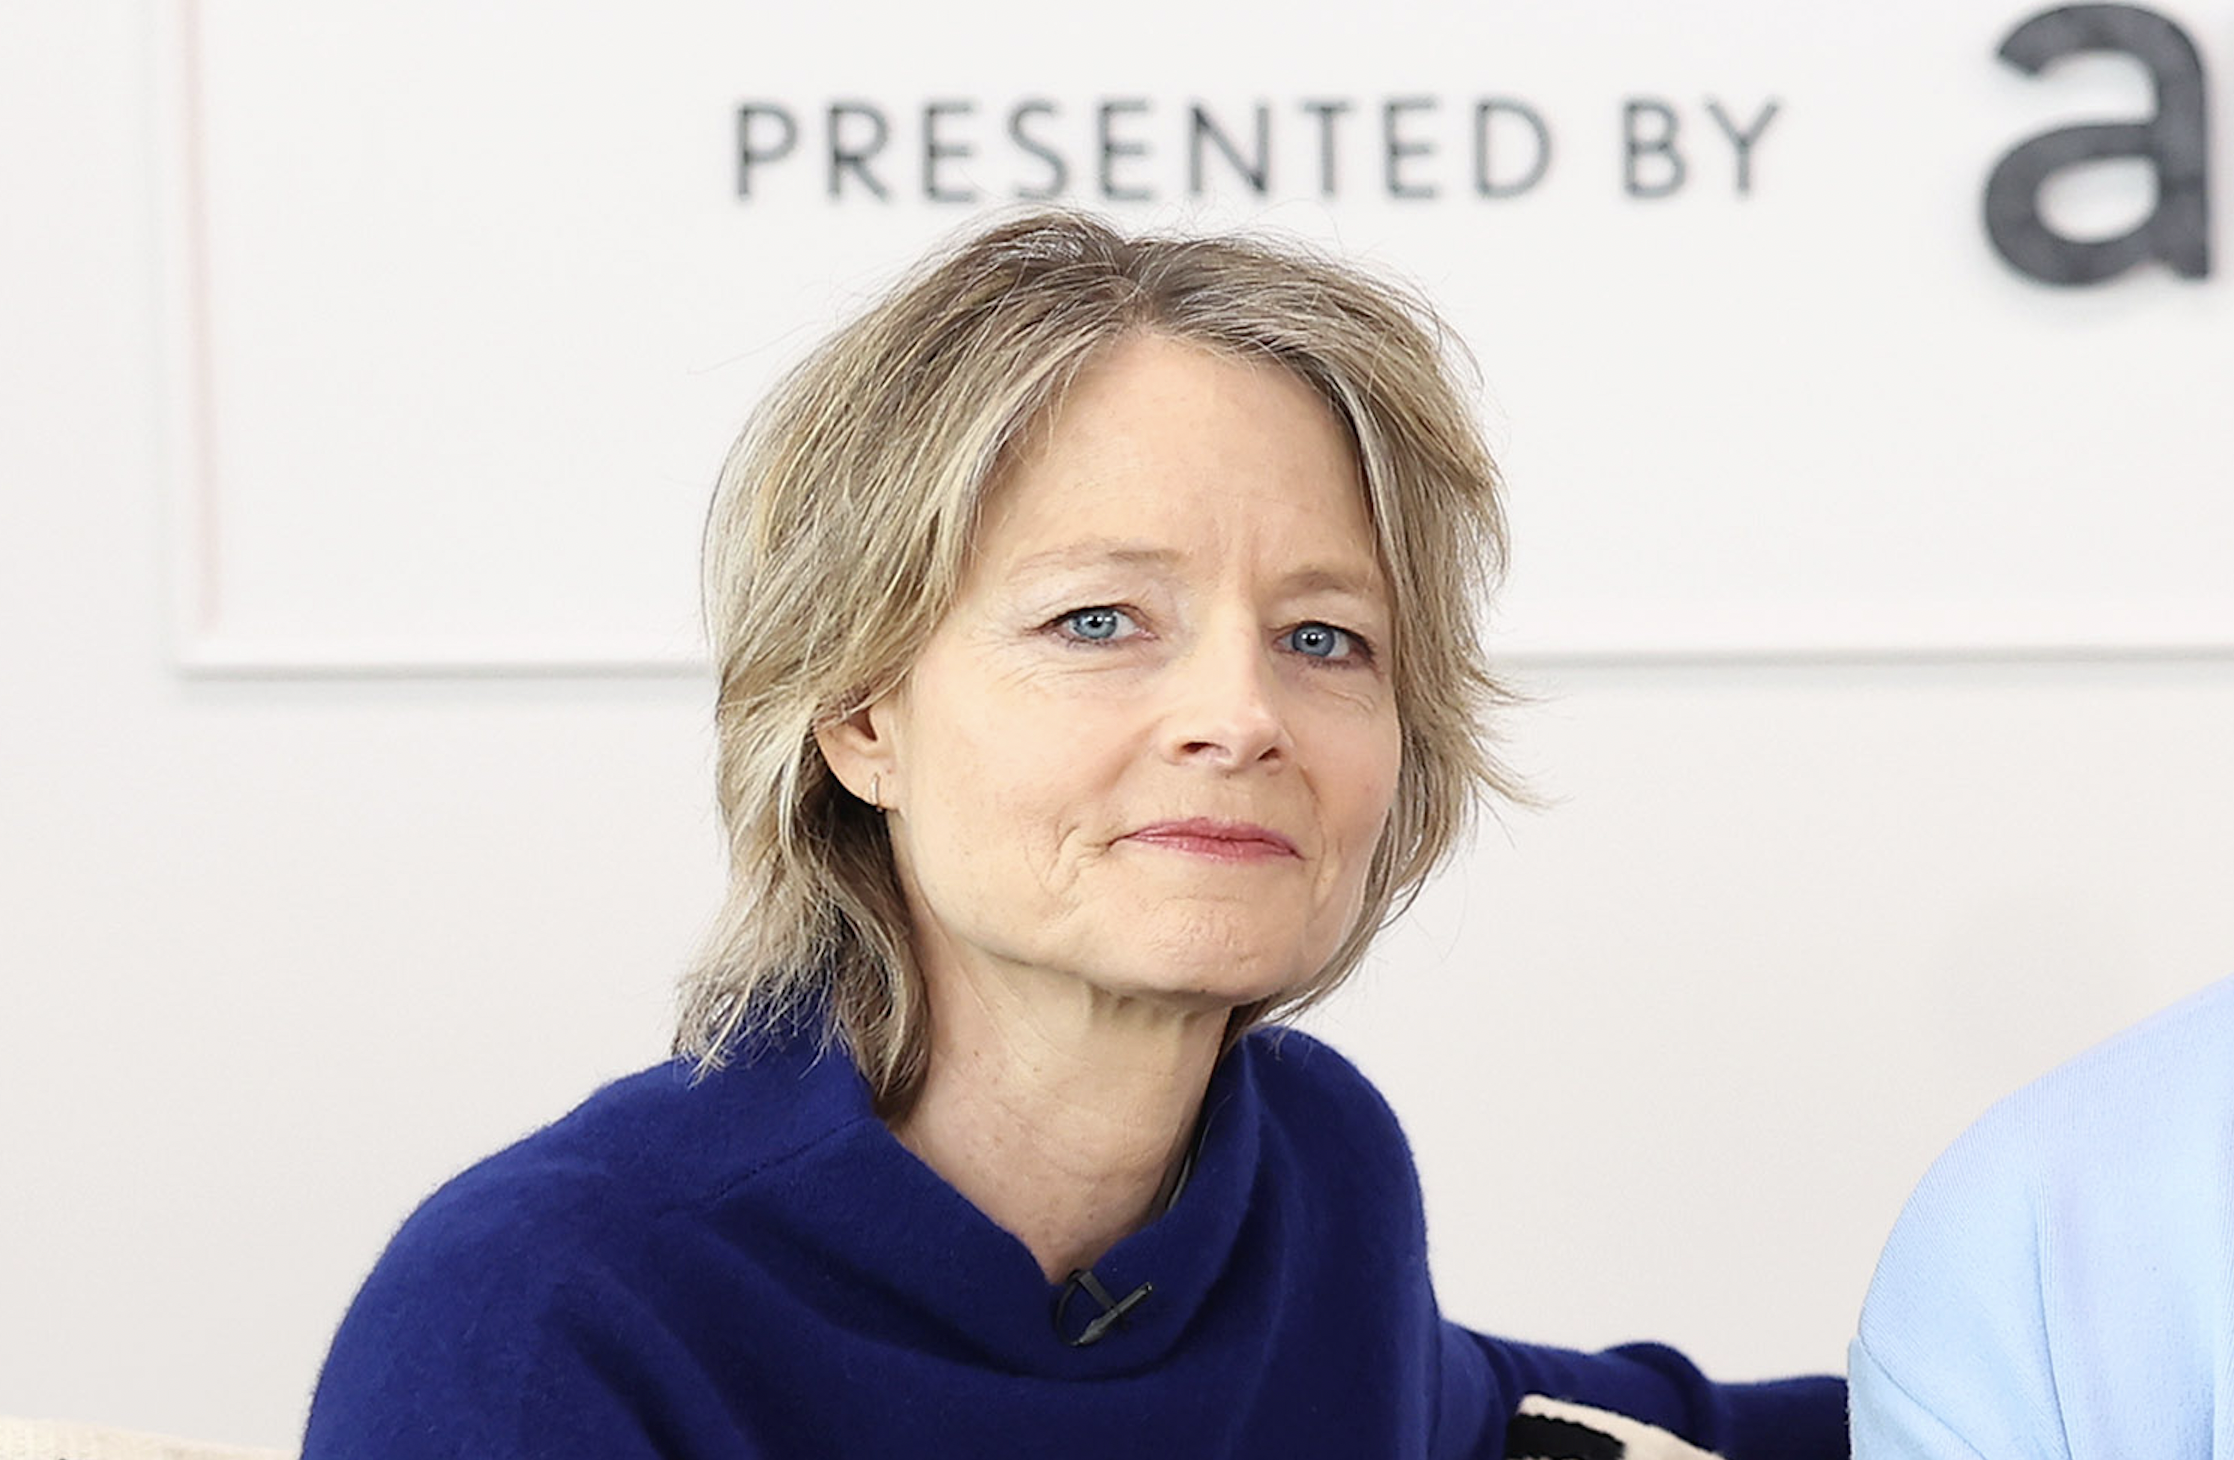 jodie foster says warner bros. giving greta gerwig ‘all the money to support' her ‘barbie' vision is ‘new for women directors': ‘i hope it continues'